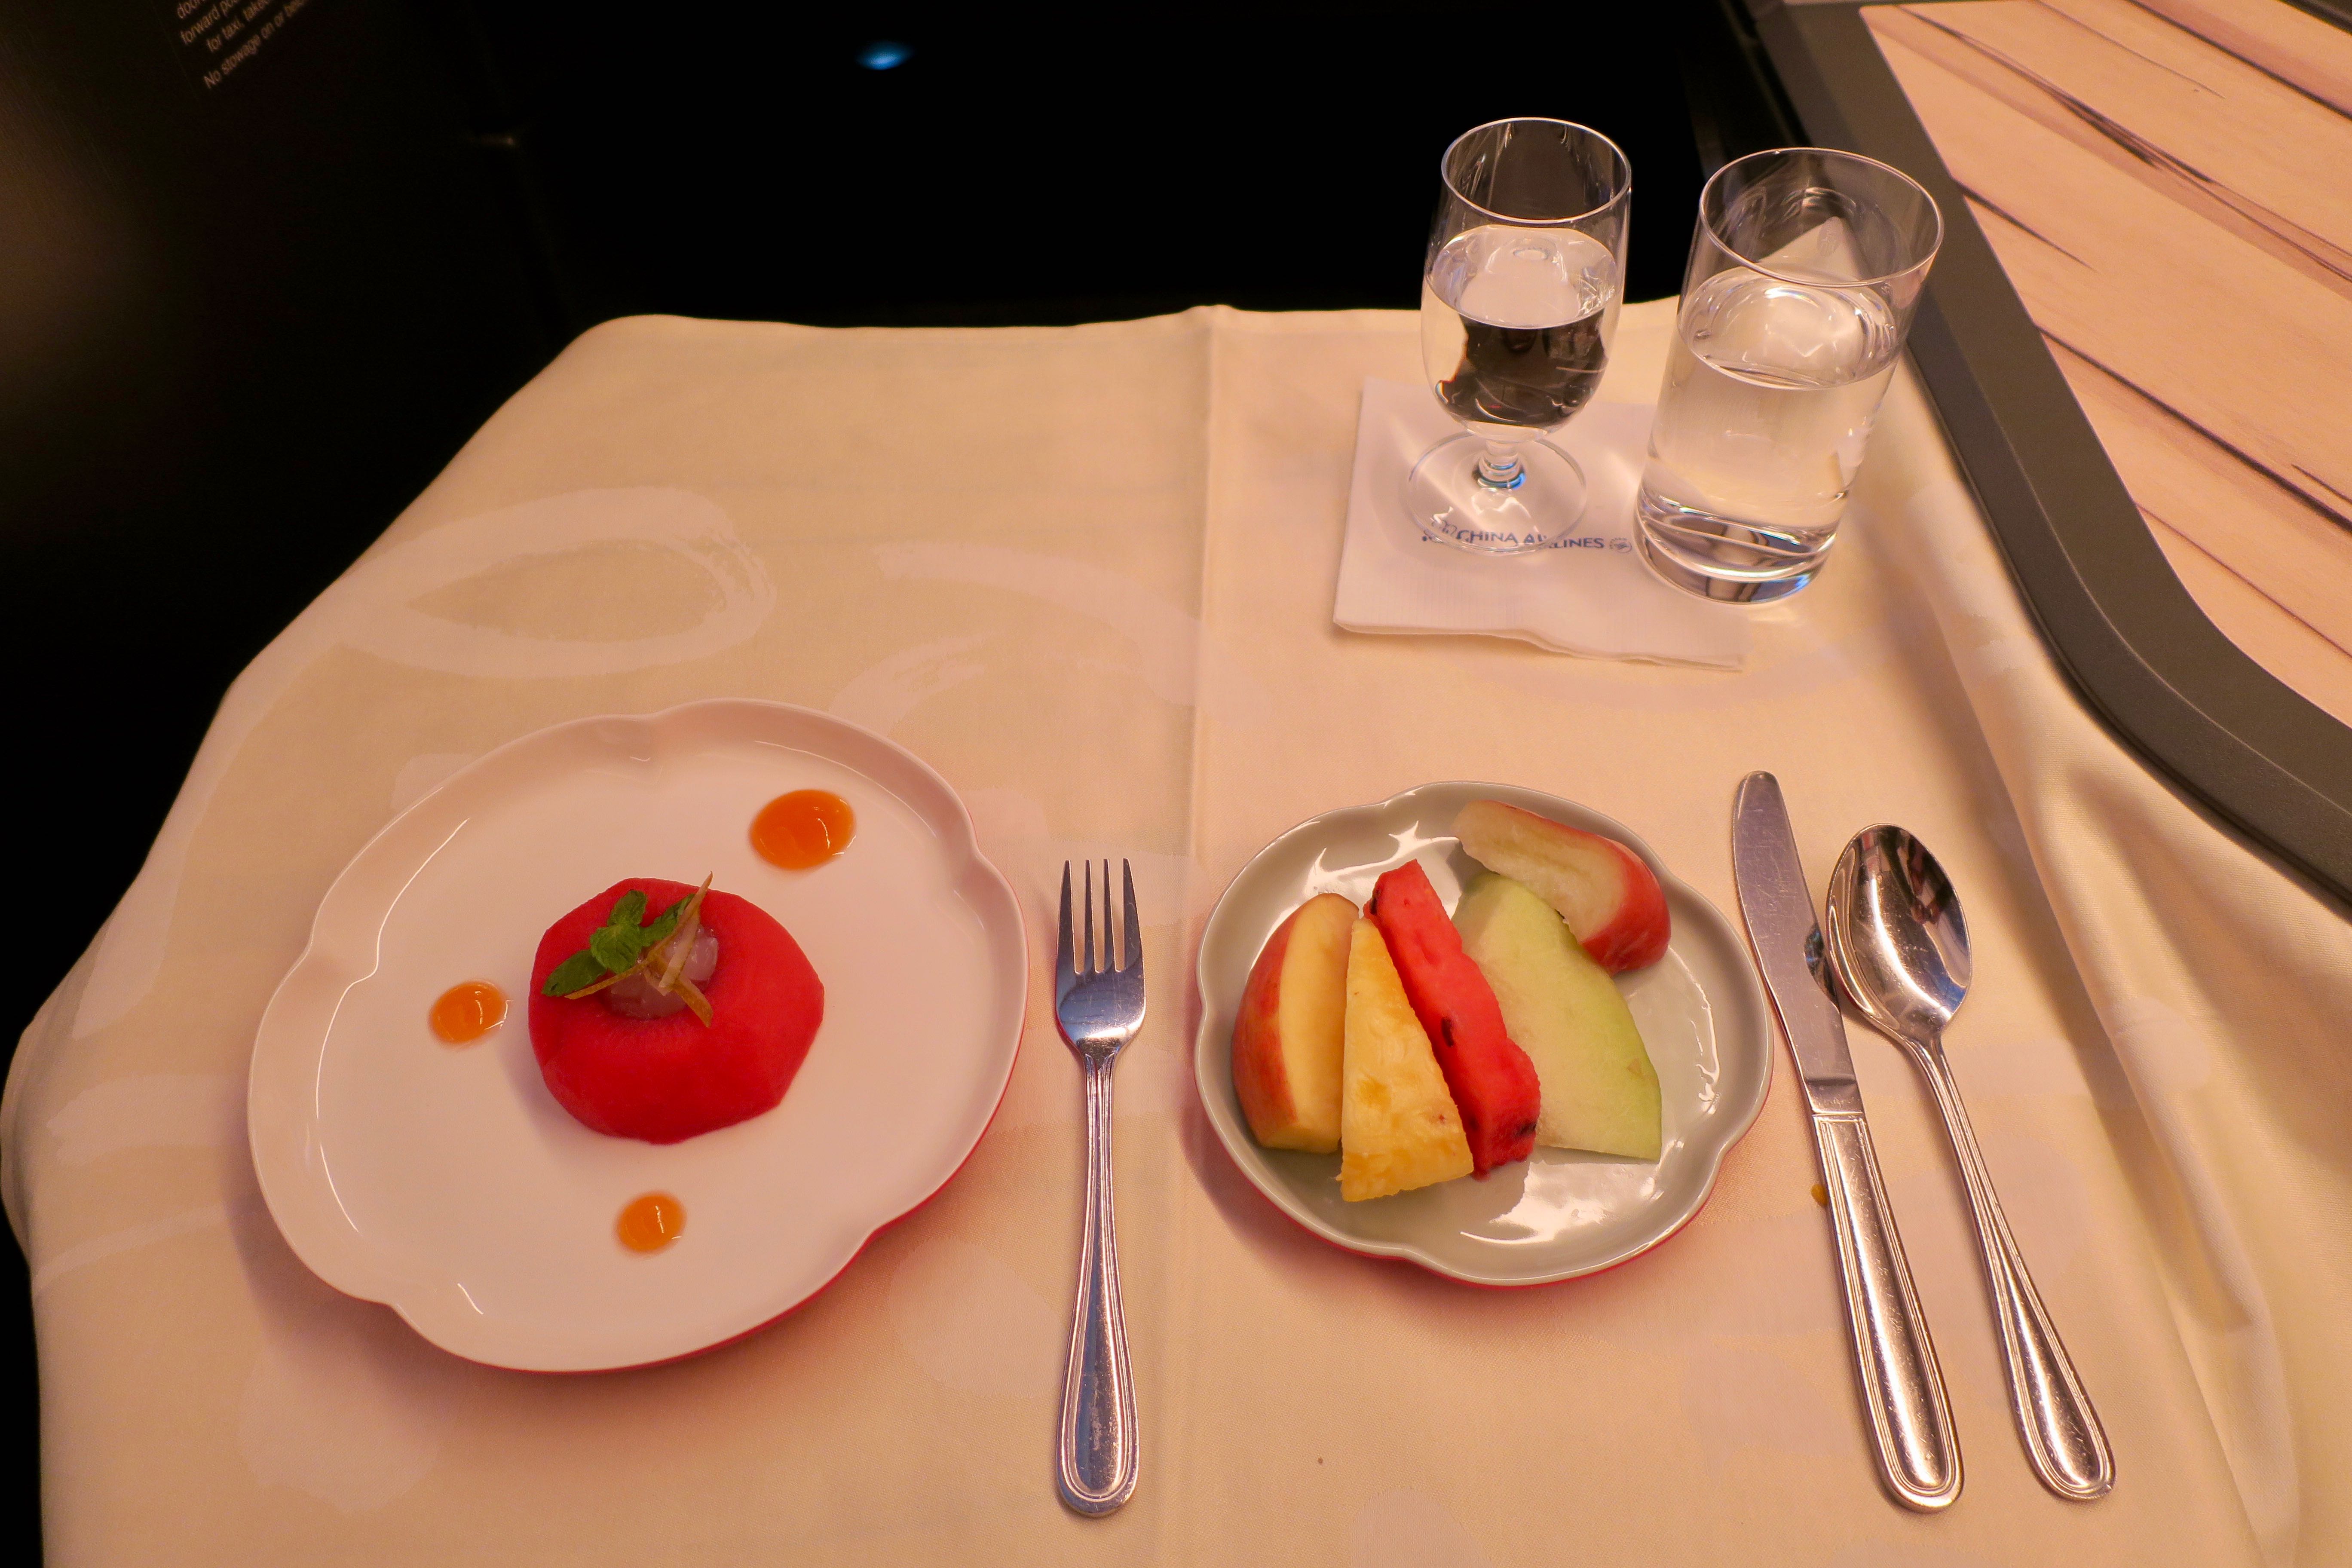 China Airlines Business Class dessert and fruits